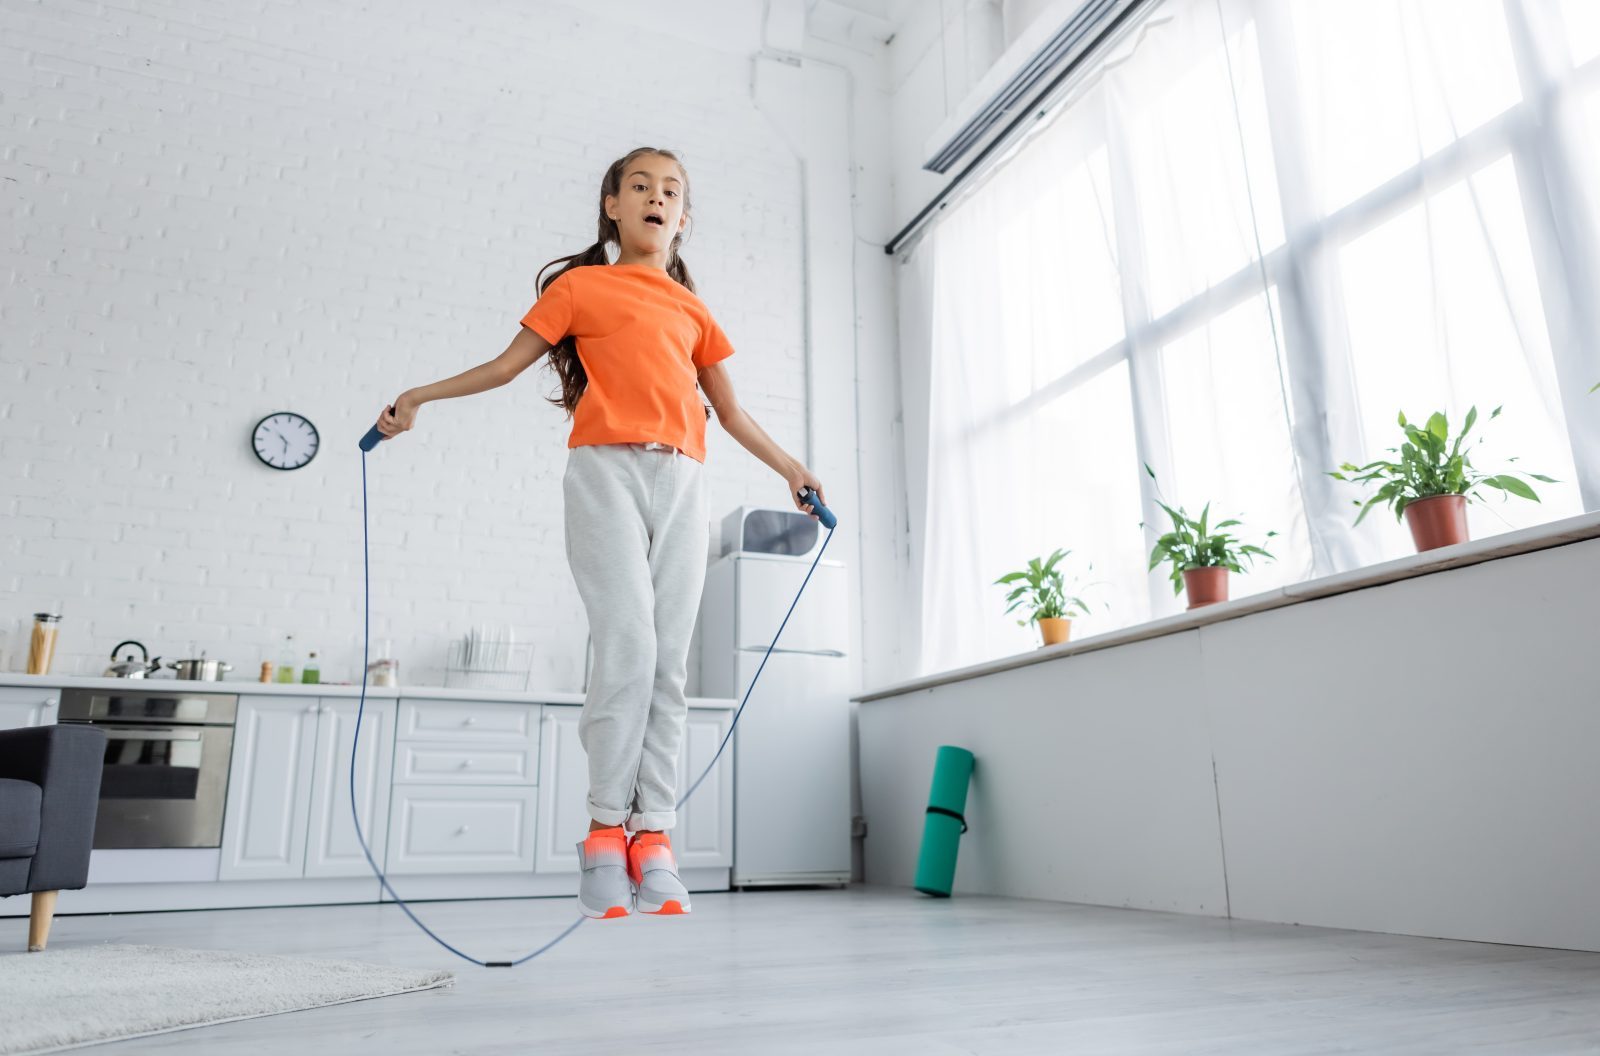 A girl in an orange shirt and sneakers jumps rope in a white living room.